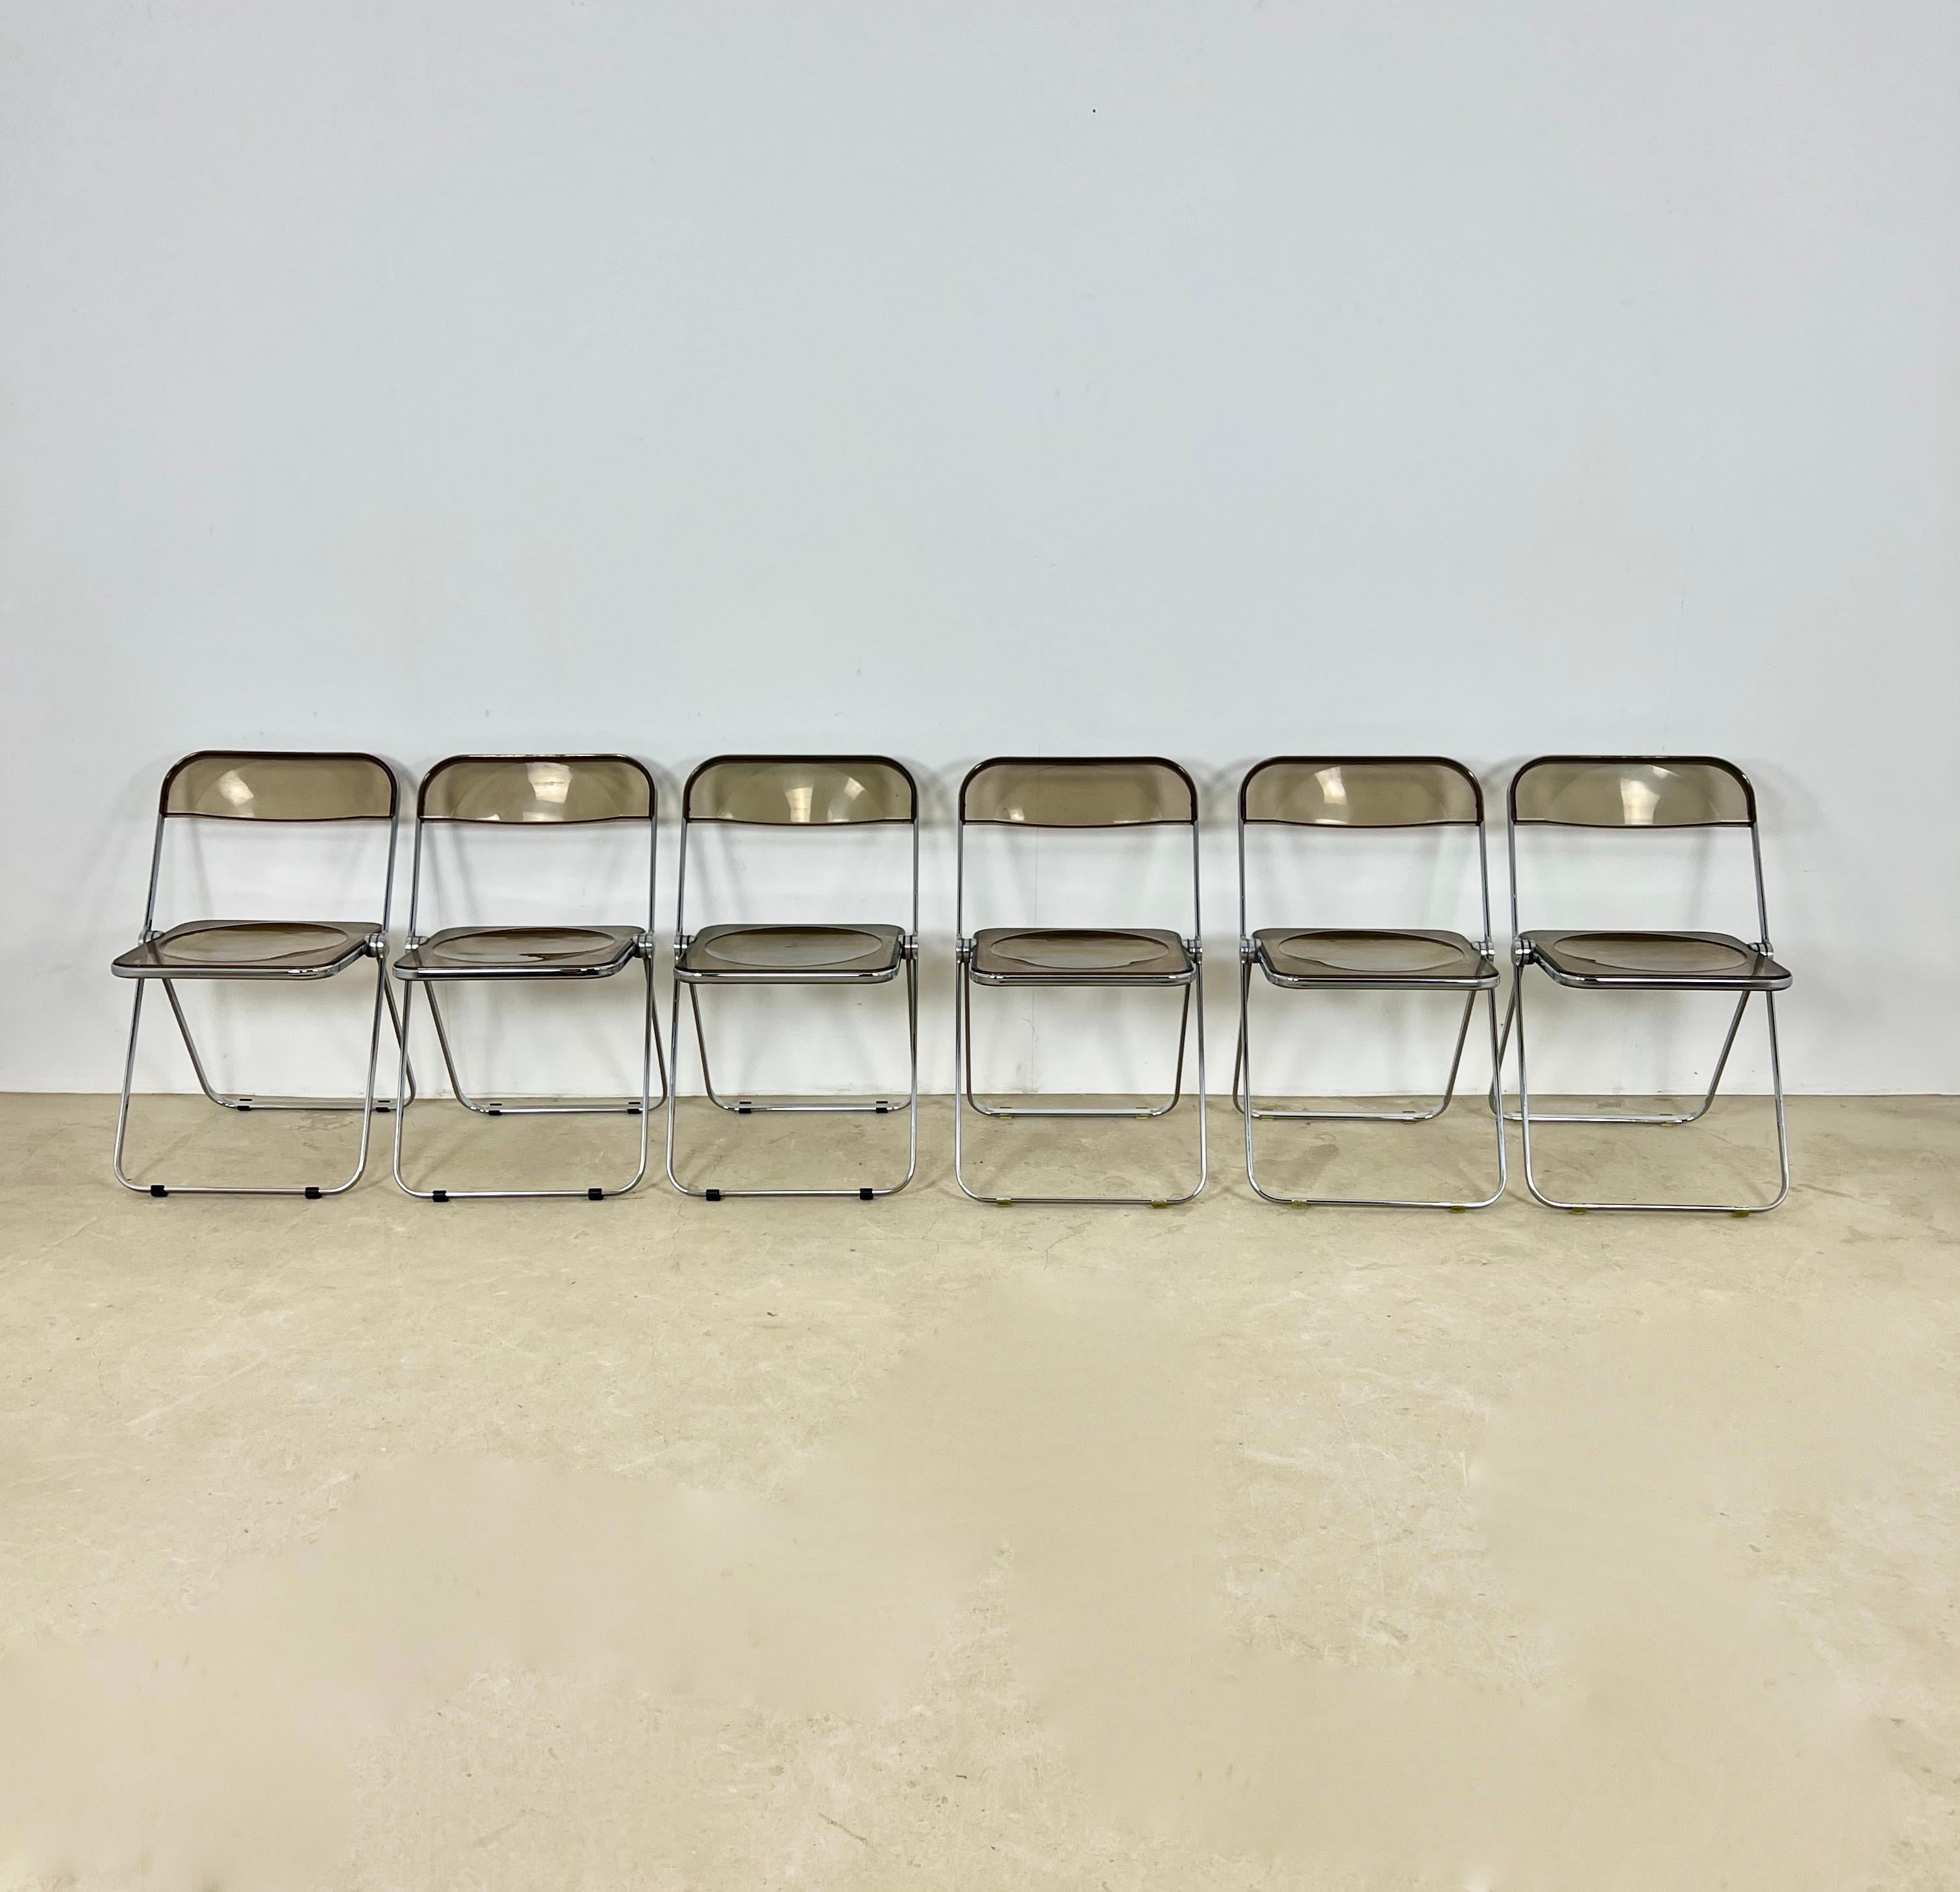 Set of 6 folding chairs in metal and plastic. Wear due to time and age of the chairs. Measure: Seat height 44cm.